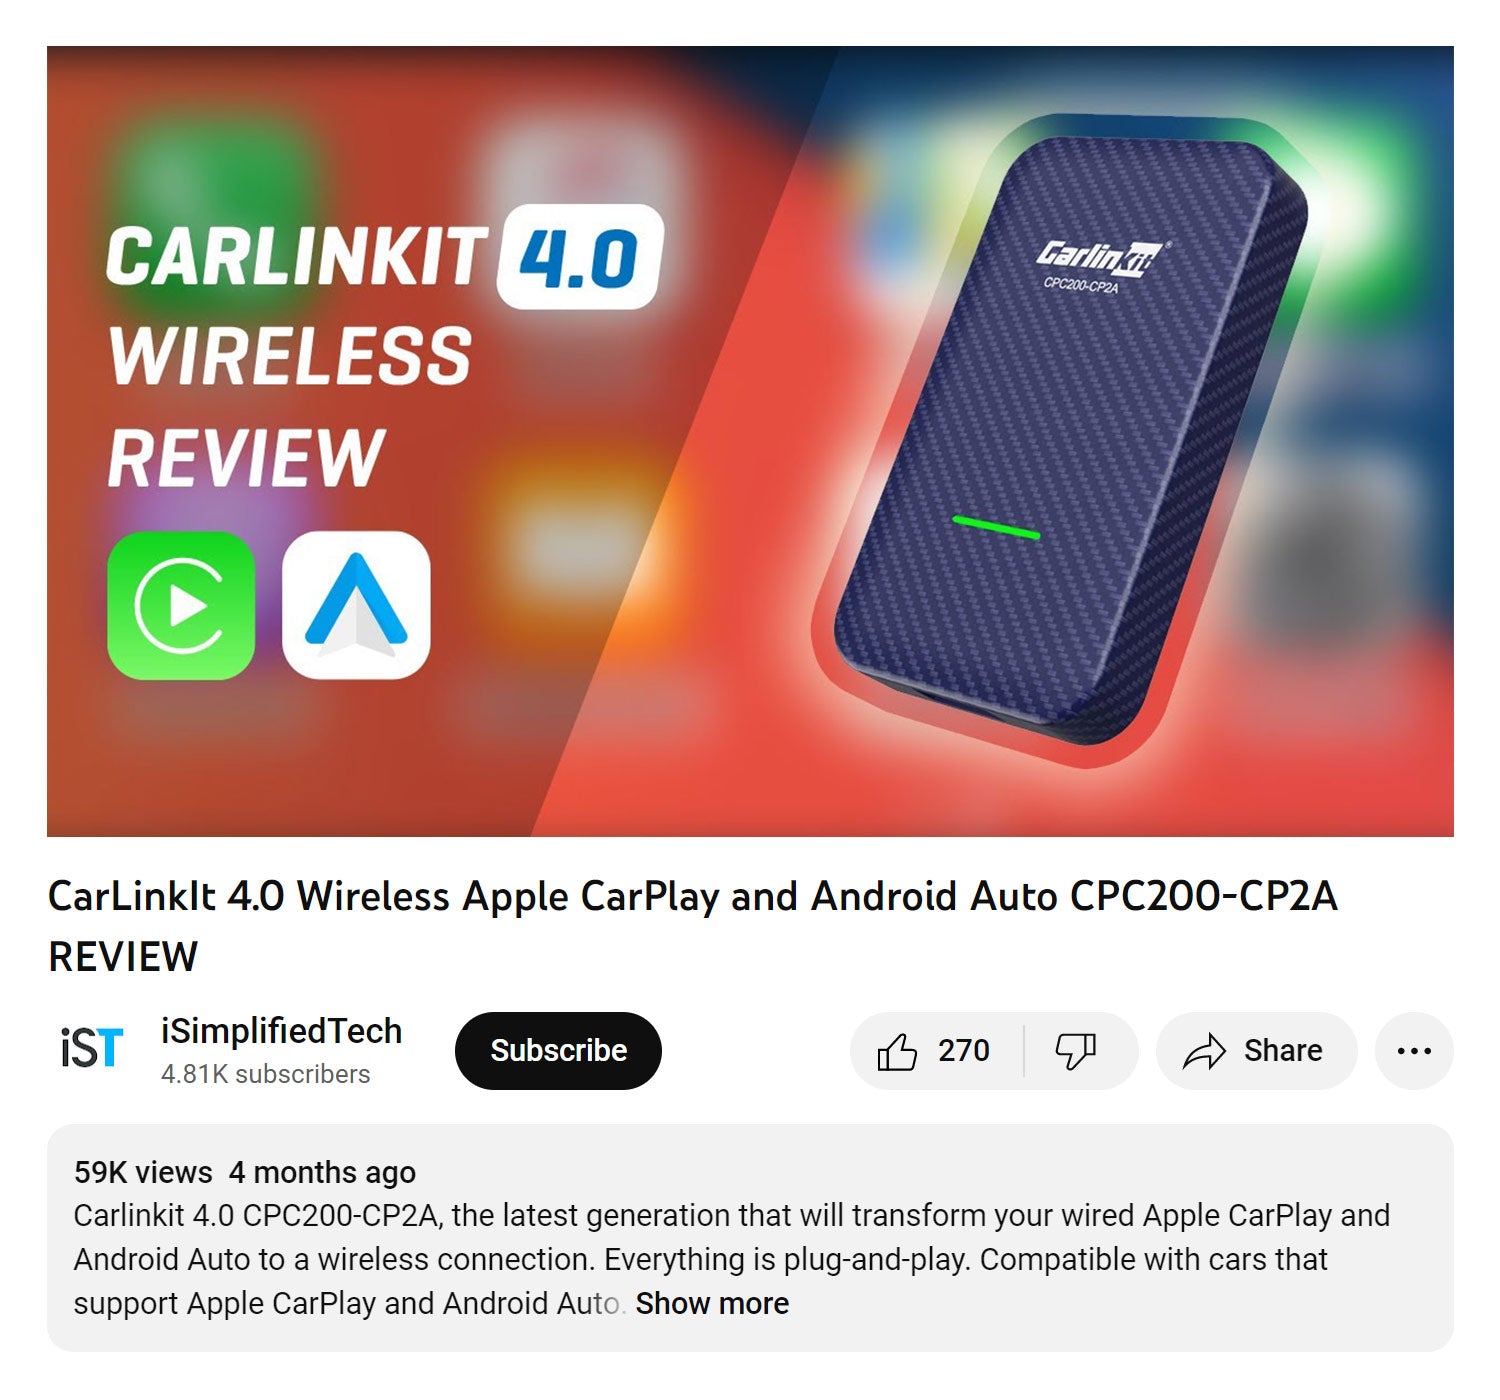 CarLinkIt 4.0 Wireless Apple CarPlay and Android Auto CPC200-CP2A